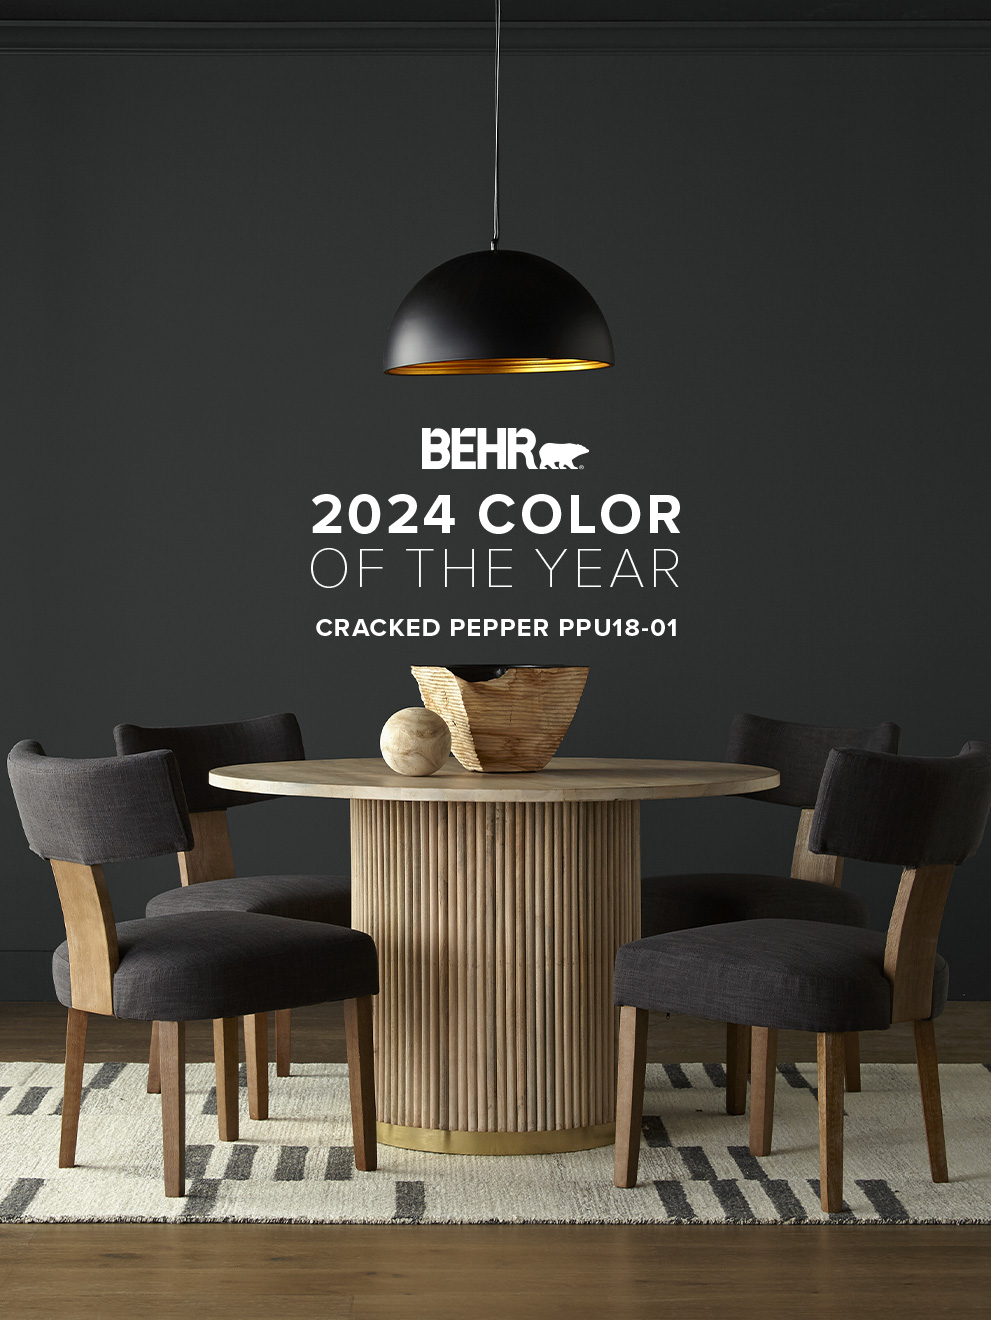 BEHR 2024 Color of the Year - Cracked Pepper